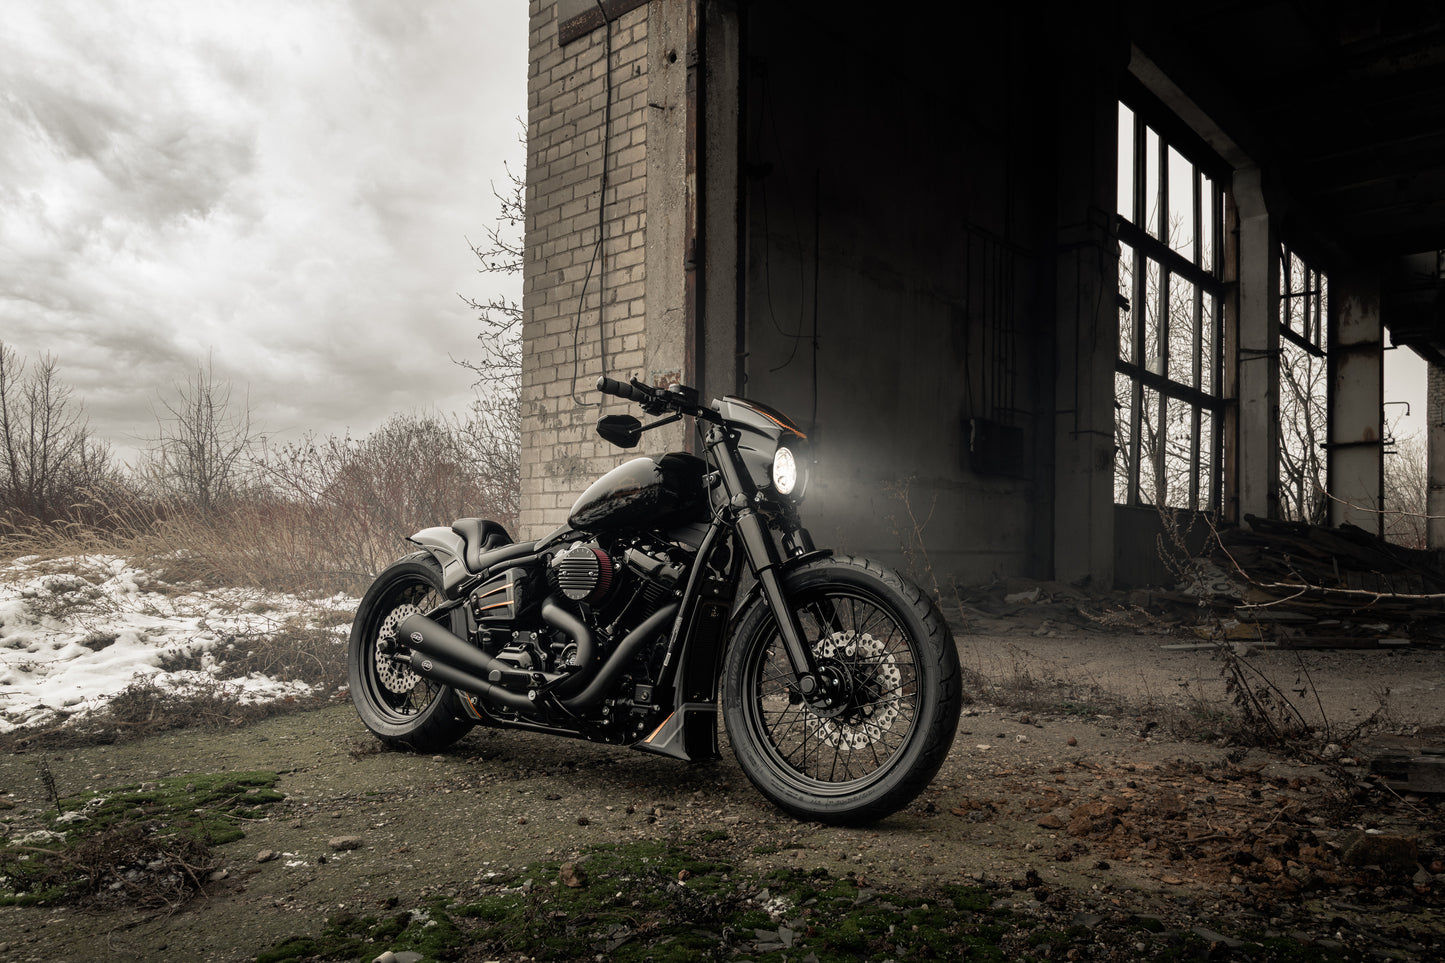 Harley Davidson motorcycle with Killer Custom "Aggressor" full fork cover set from the side outside on a gloomy day in an abandoned environment